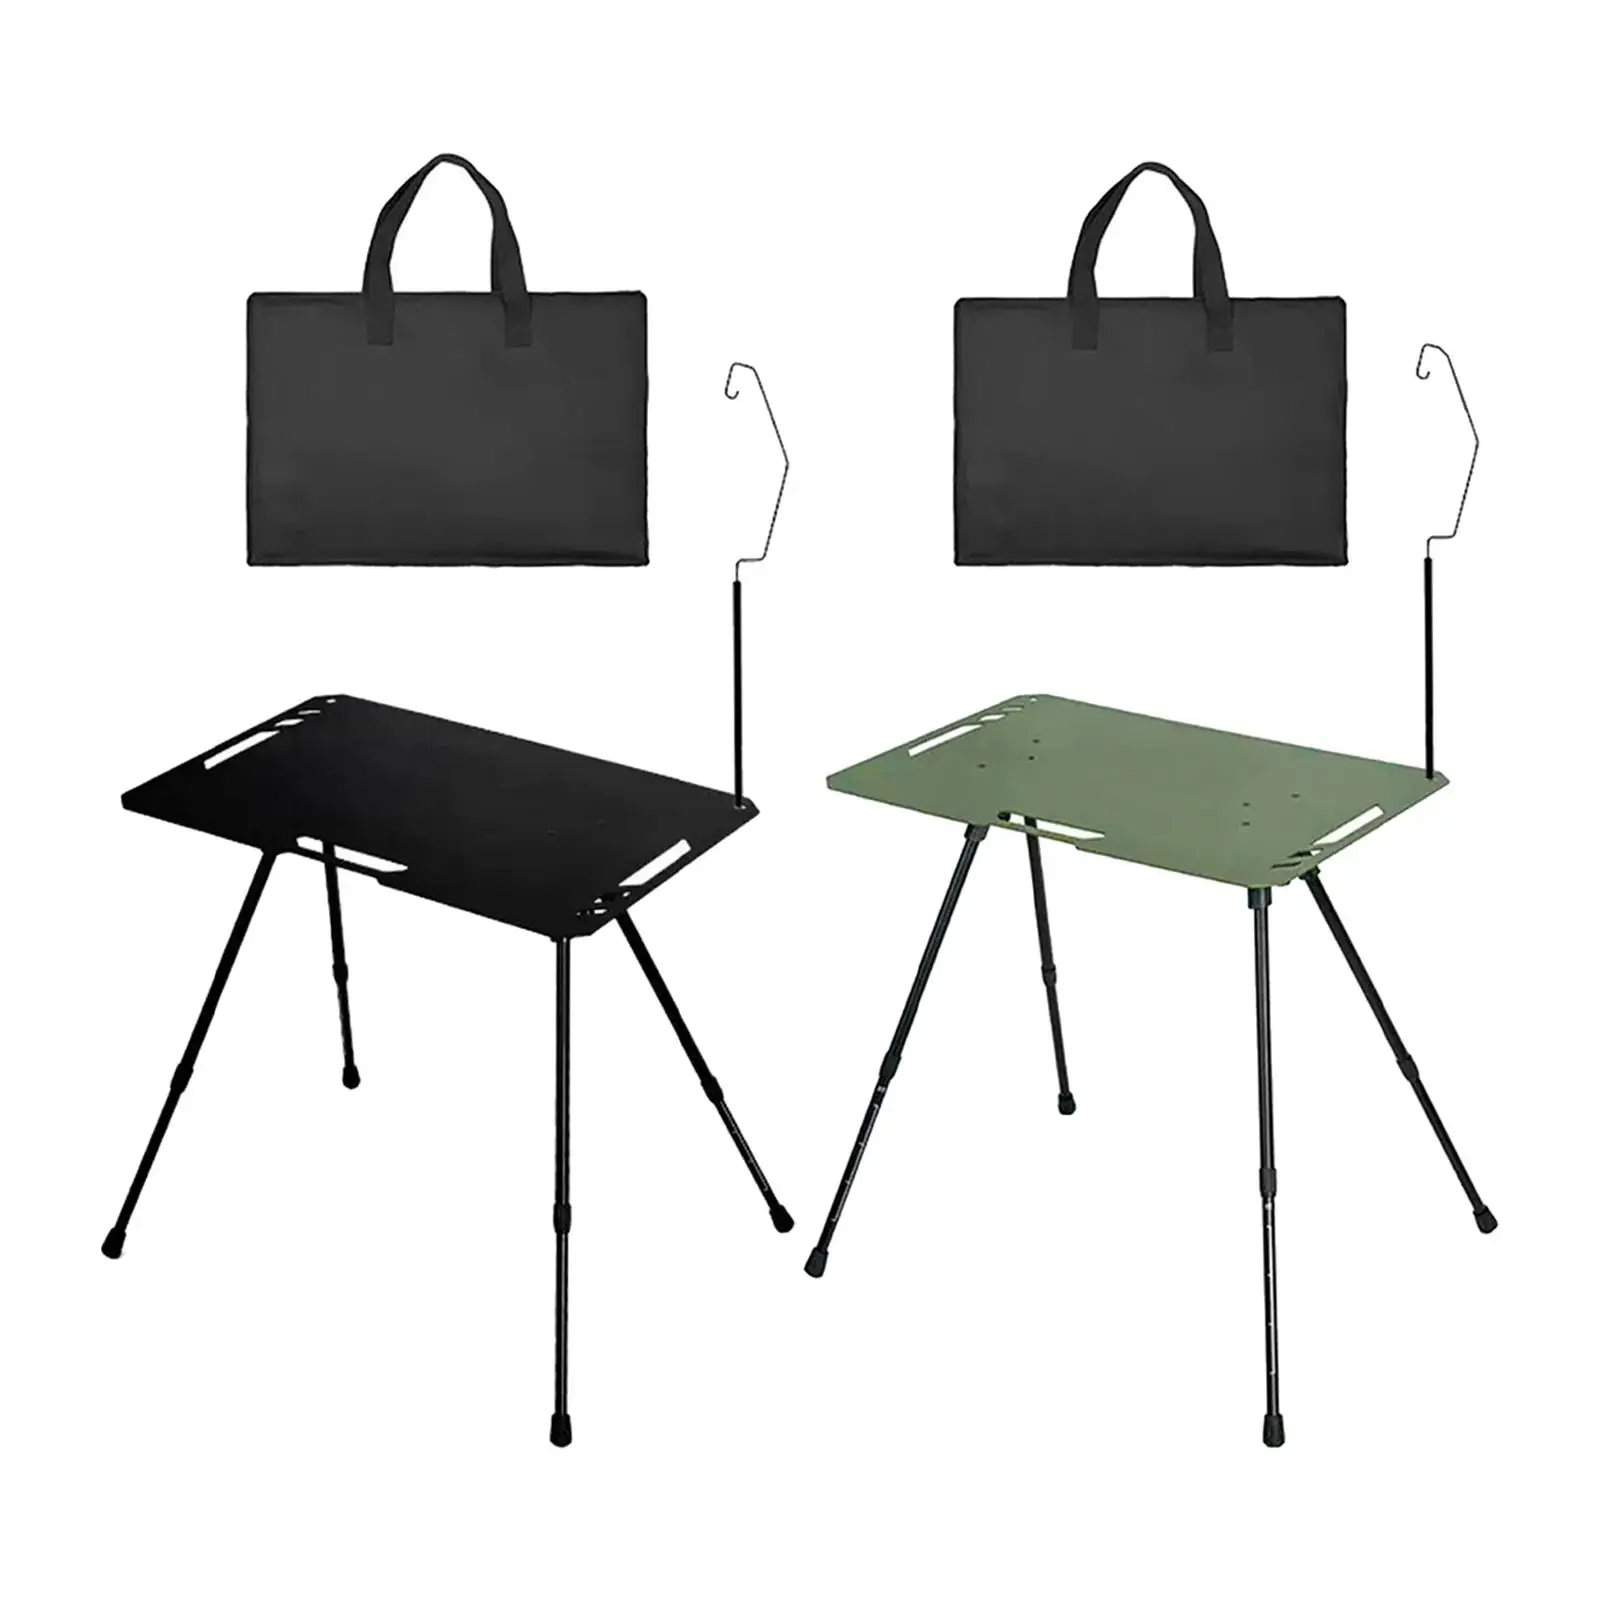 Camping Table Lightweight Load 30kg Retractable Outdoor Folding Table Side Table for Patio Camp Barbecue Travel Outdoor